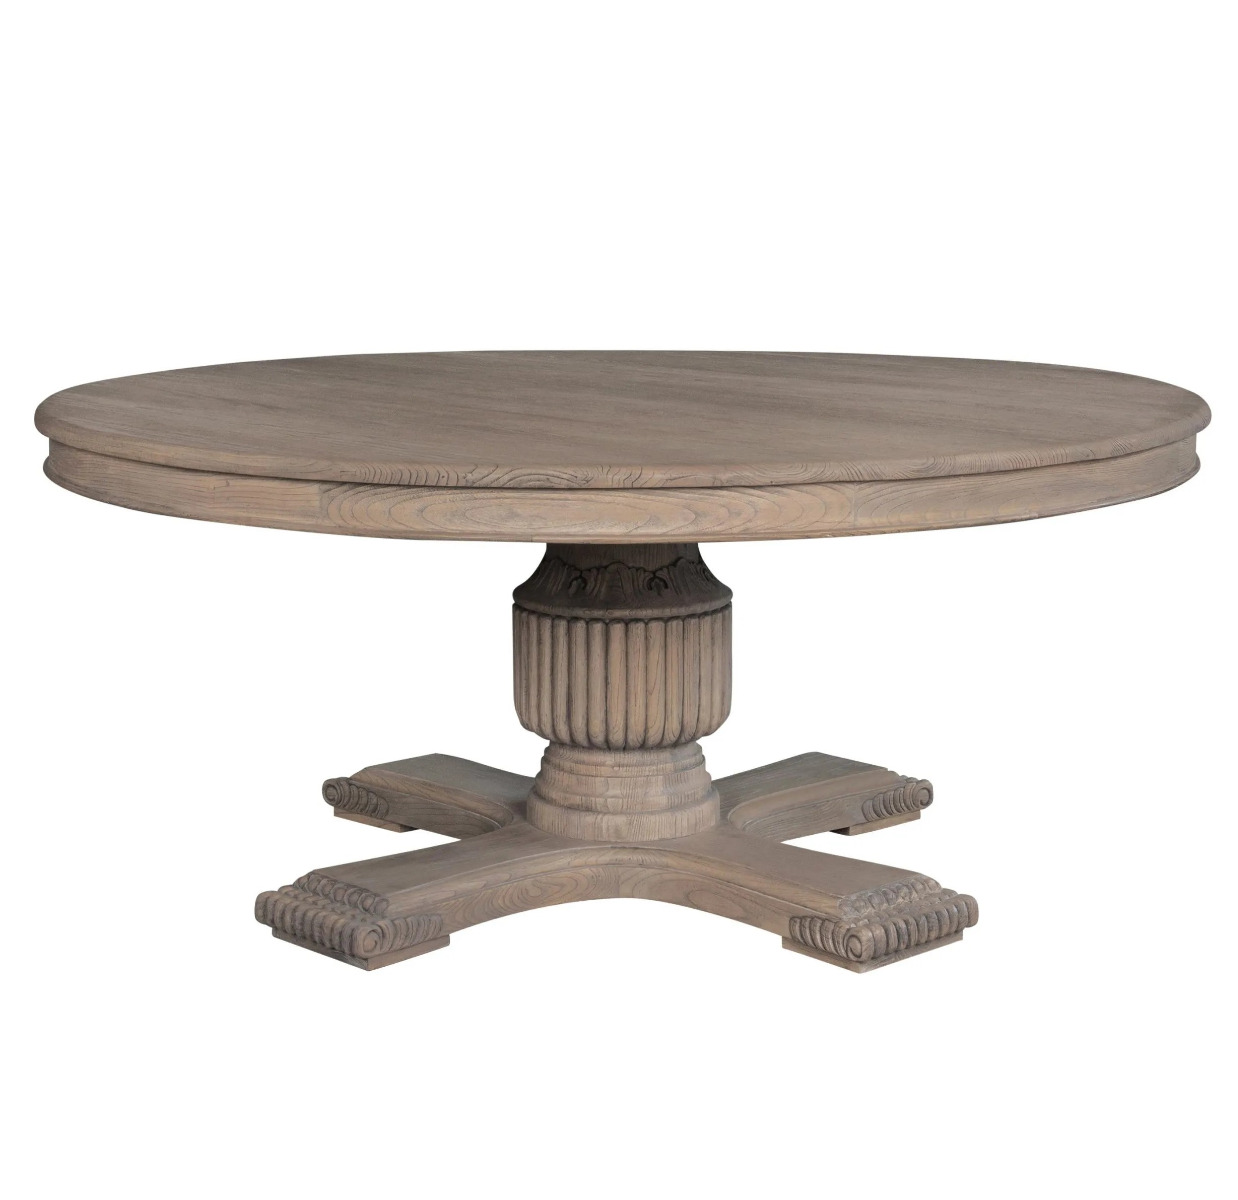 Sofia Dining Table Round in All Rustic Brown